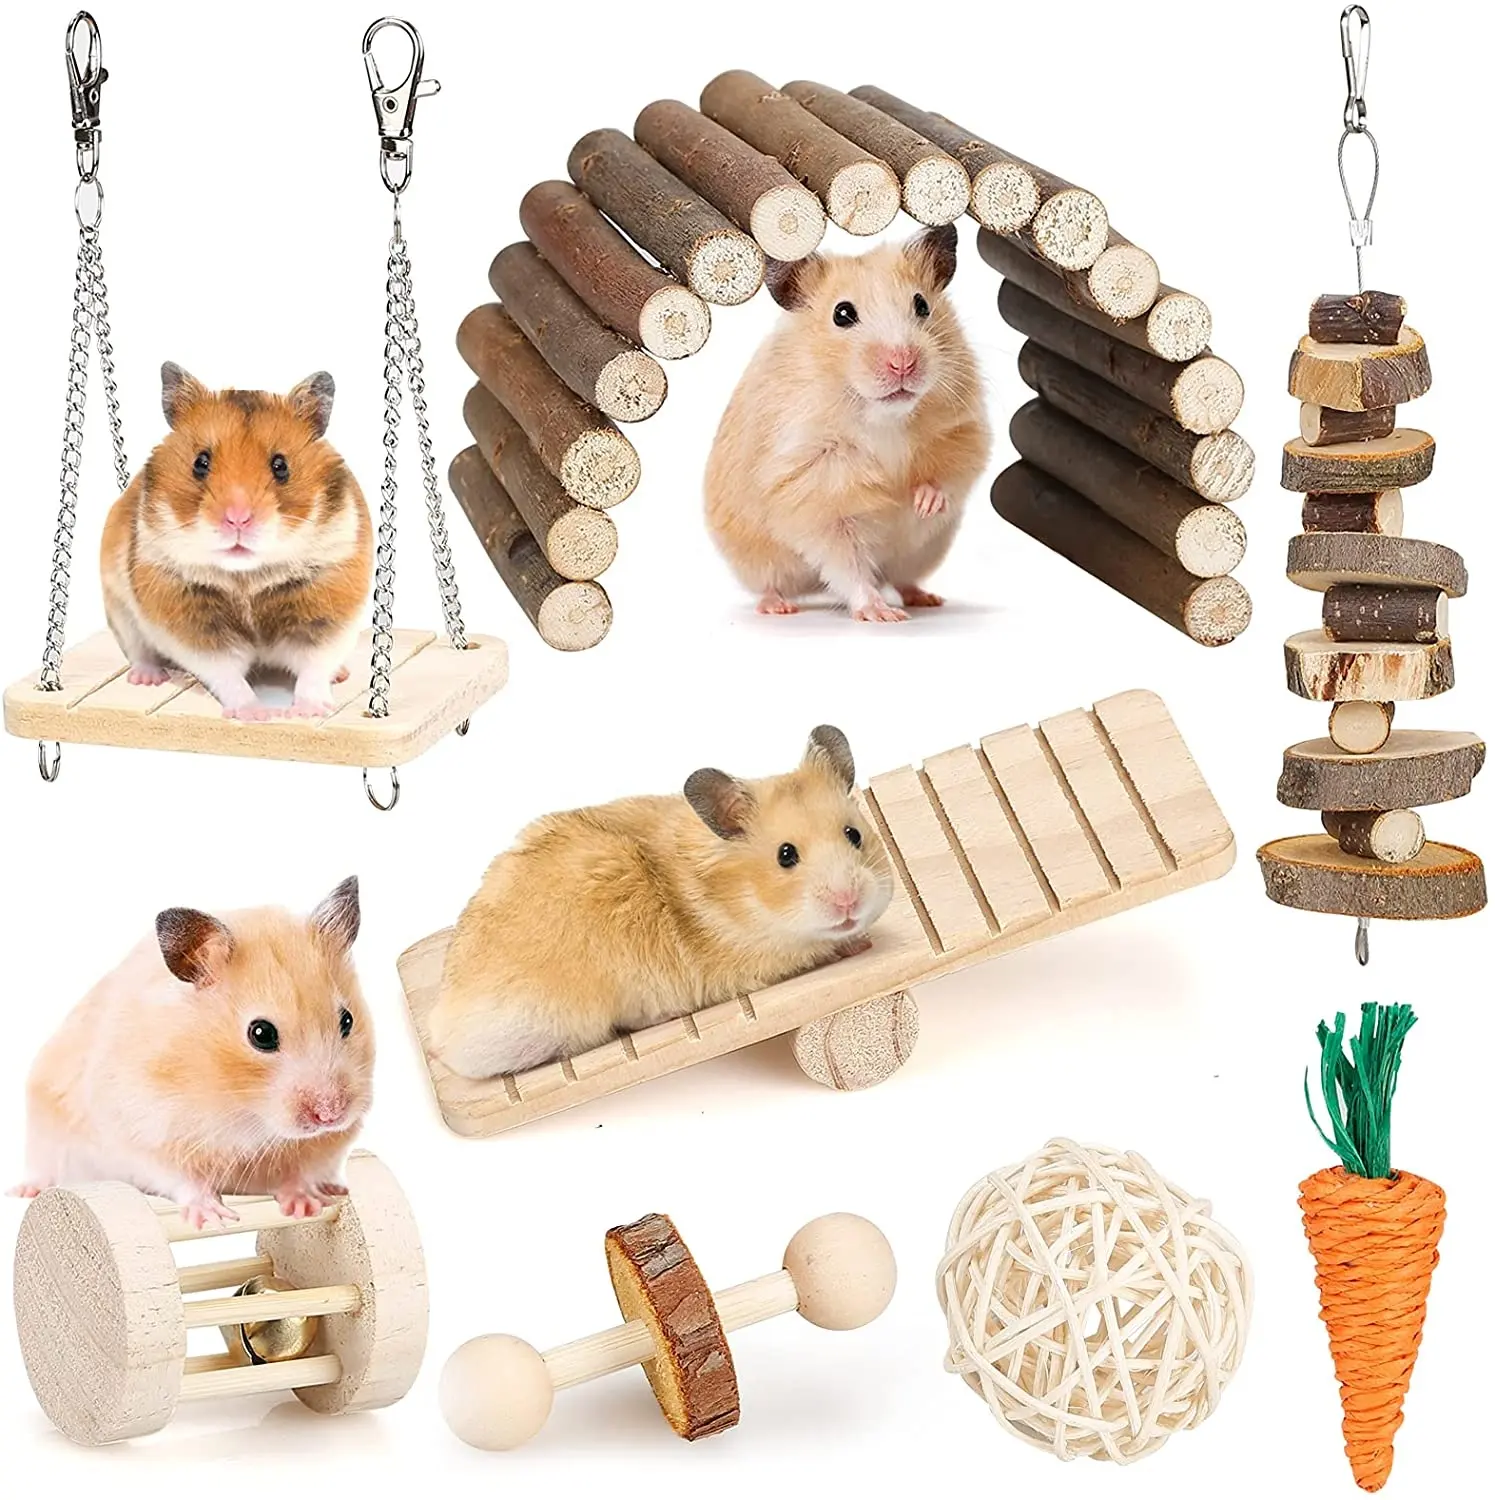 Kingtale Teeth Care Wooden Accessories Small Animal Molar Toys Hamster Chew Toys Set for Guinea Pigs